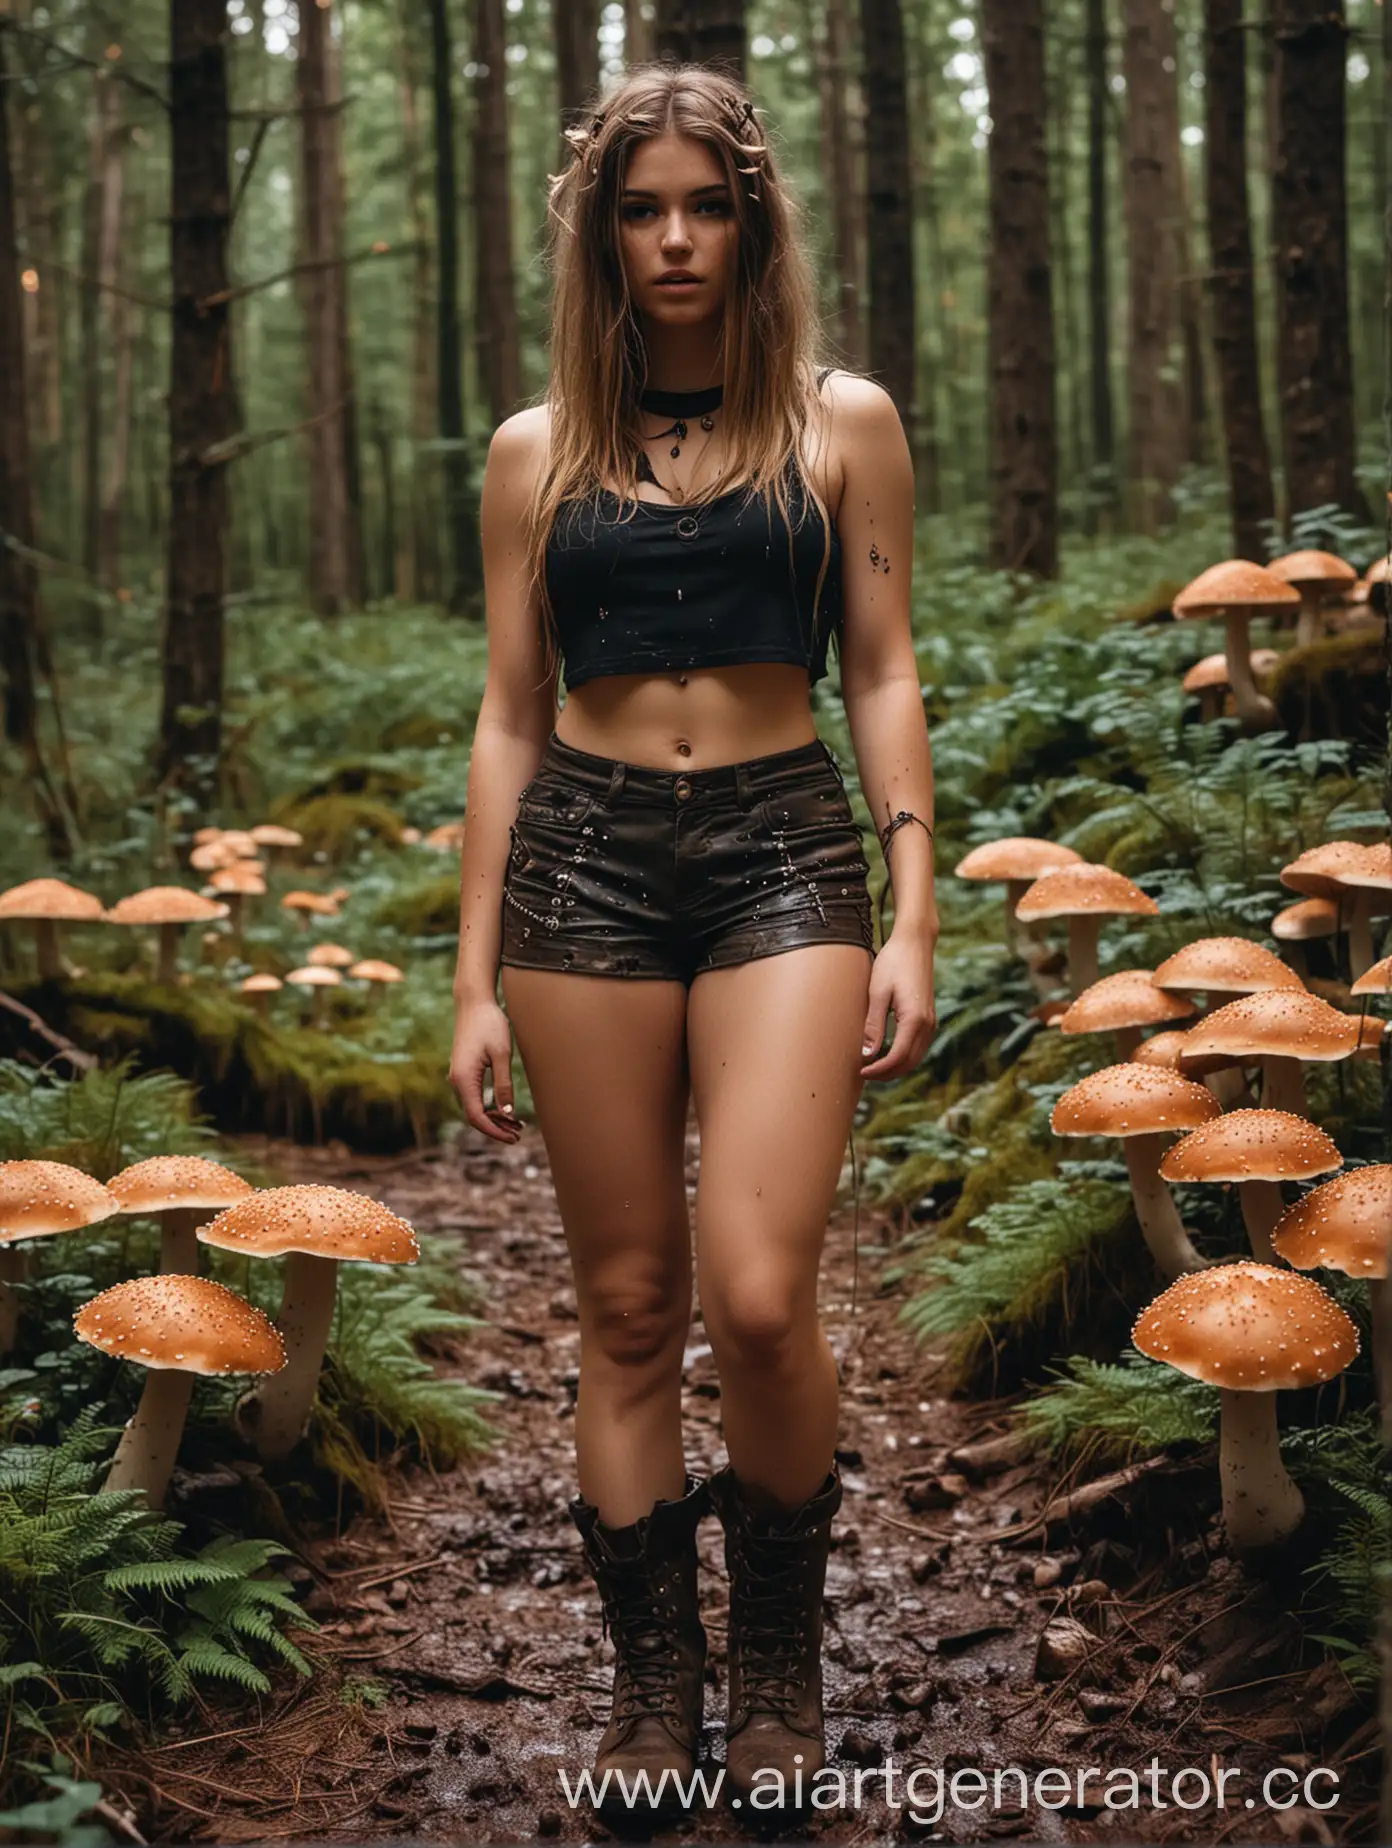 A raver girl in a forest surrounded by glowing mushrooms, wearintightg black shorts, a meshed crop top, and brown military boots with dirt or mud on them